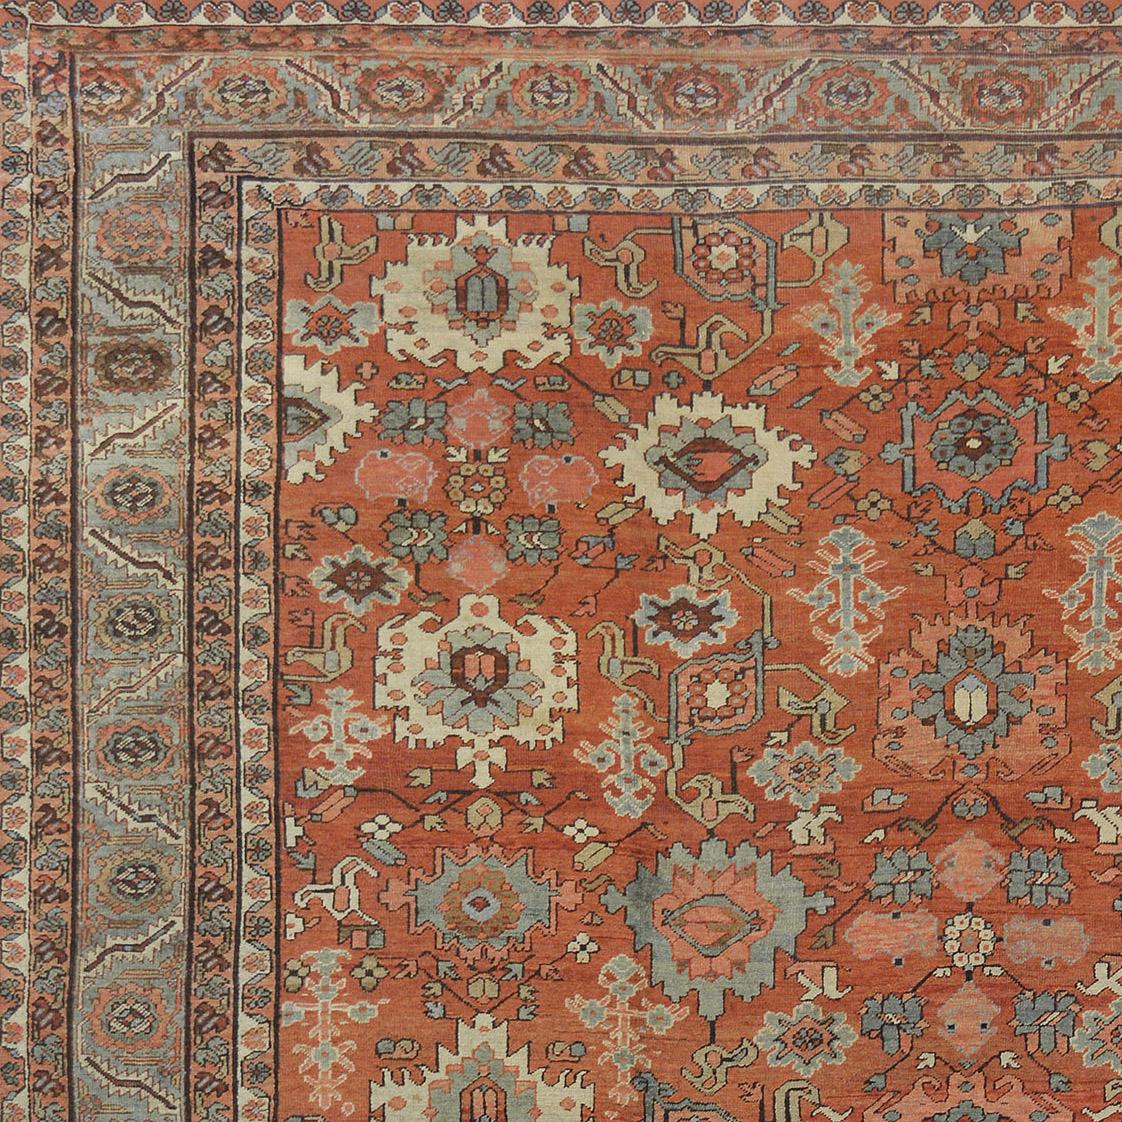 This traditional handwoven Persian Bakhshaish rug has a shaded terra cotta field of intricate polychrome palmette pendants issuing angled vines and geometric floral motif, in a shaded platinum scrolling palmette pendant vine border, between a